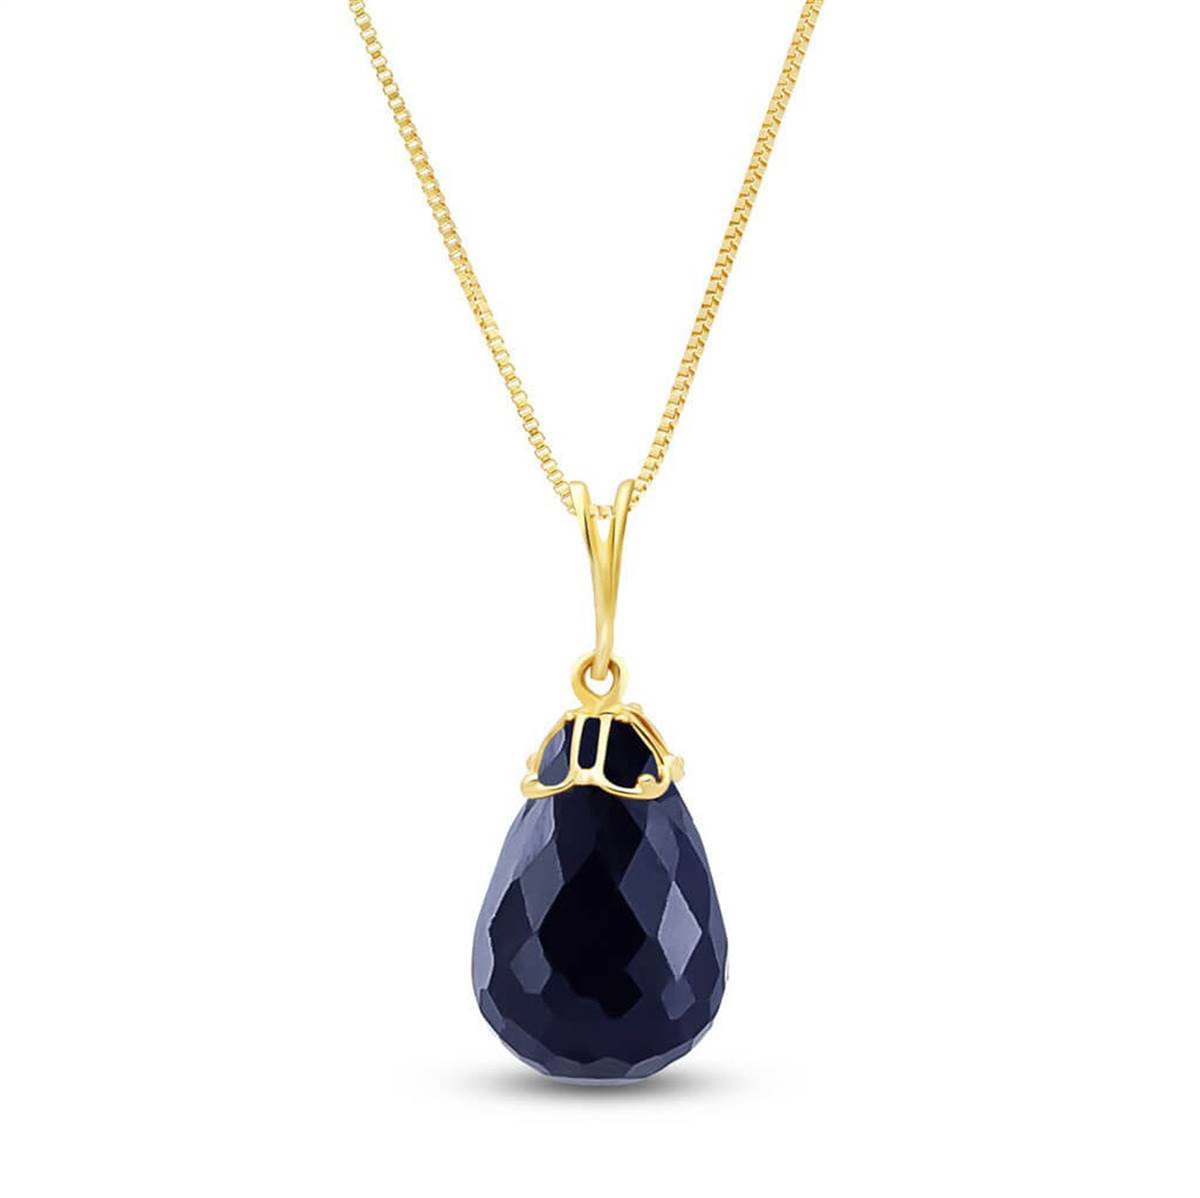 14.8 Carat 14K Solid Yellow Gold Necklace Briolette Natural Sapphire